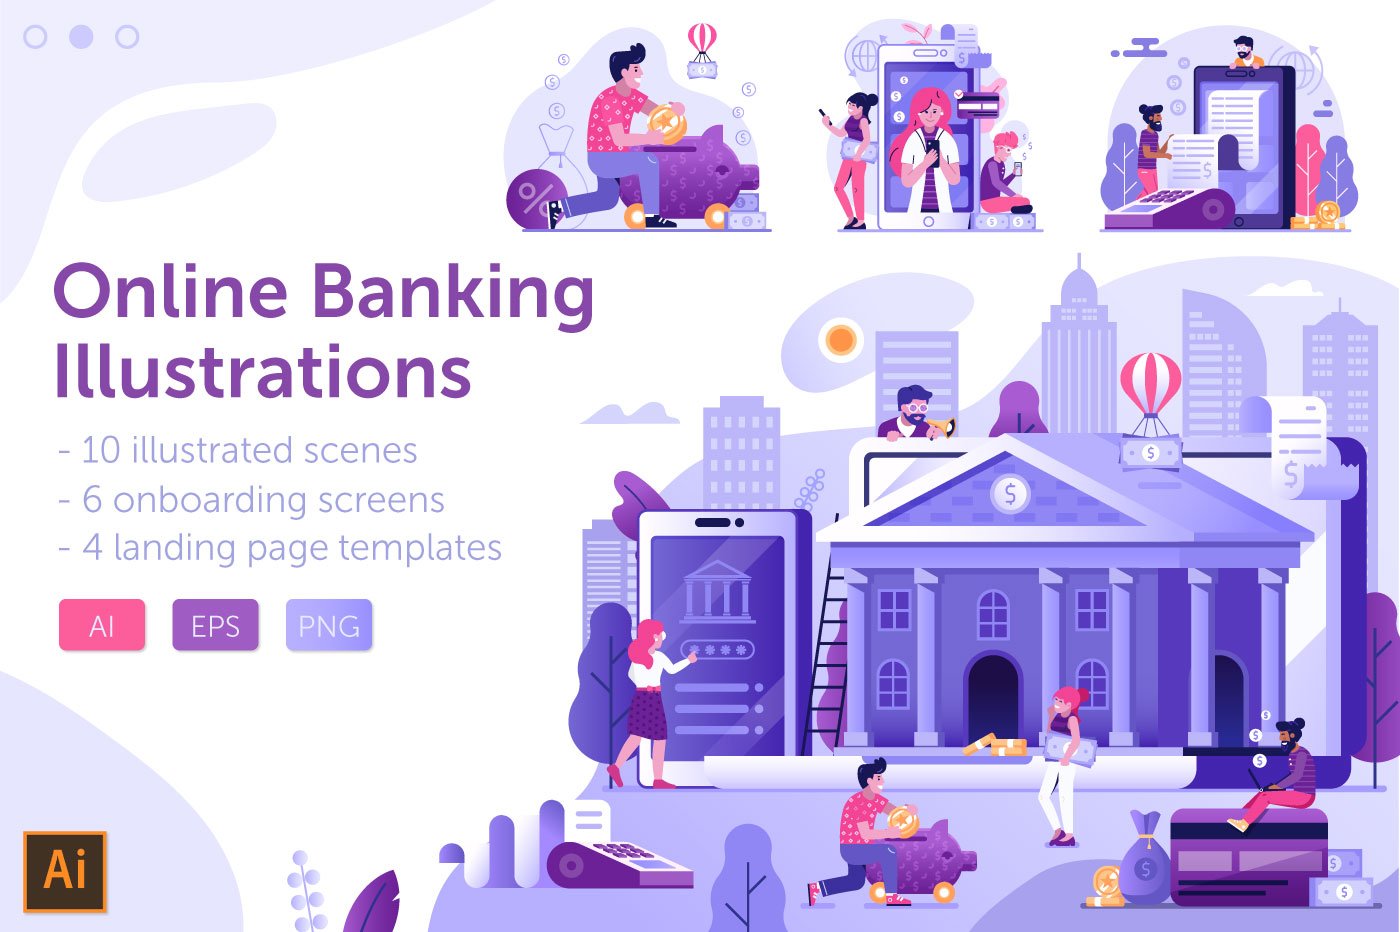 Online Banking Web Illustrations cover image.